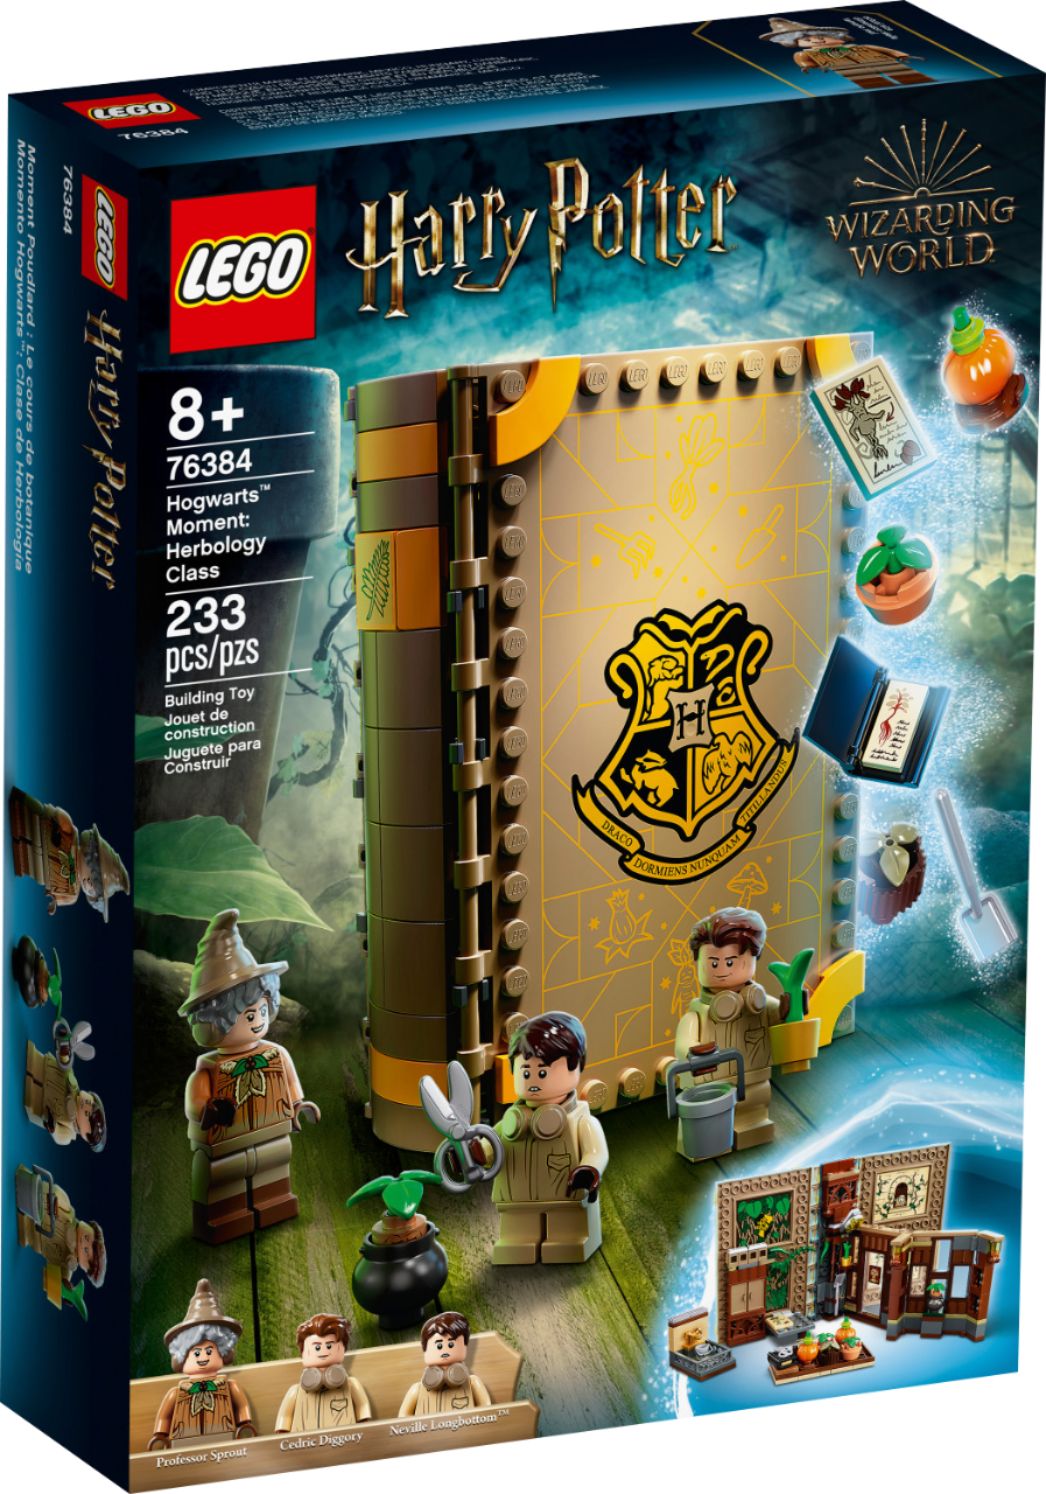 Review: Lego Harry Potter Video Game Has the Movie Magic, Plus Silliness